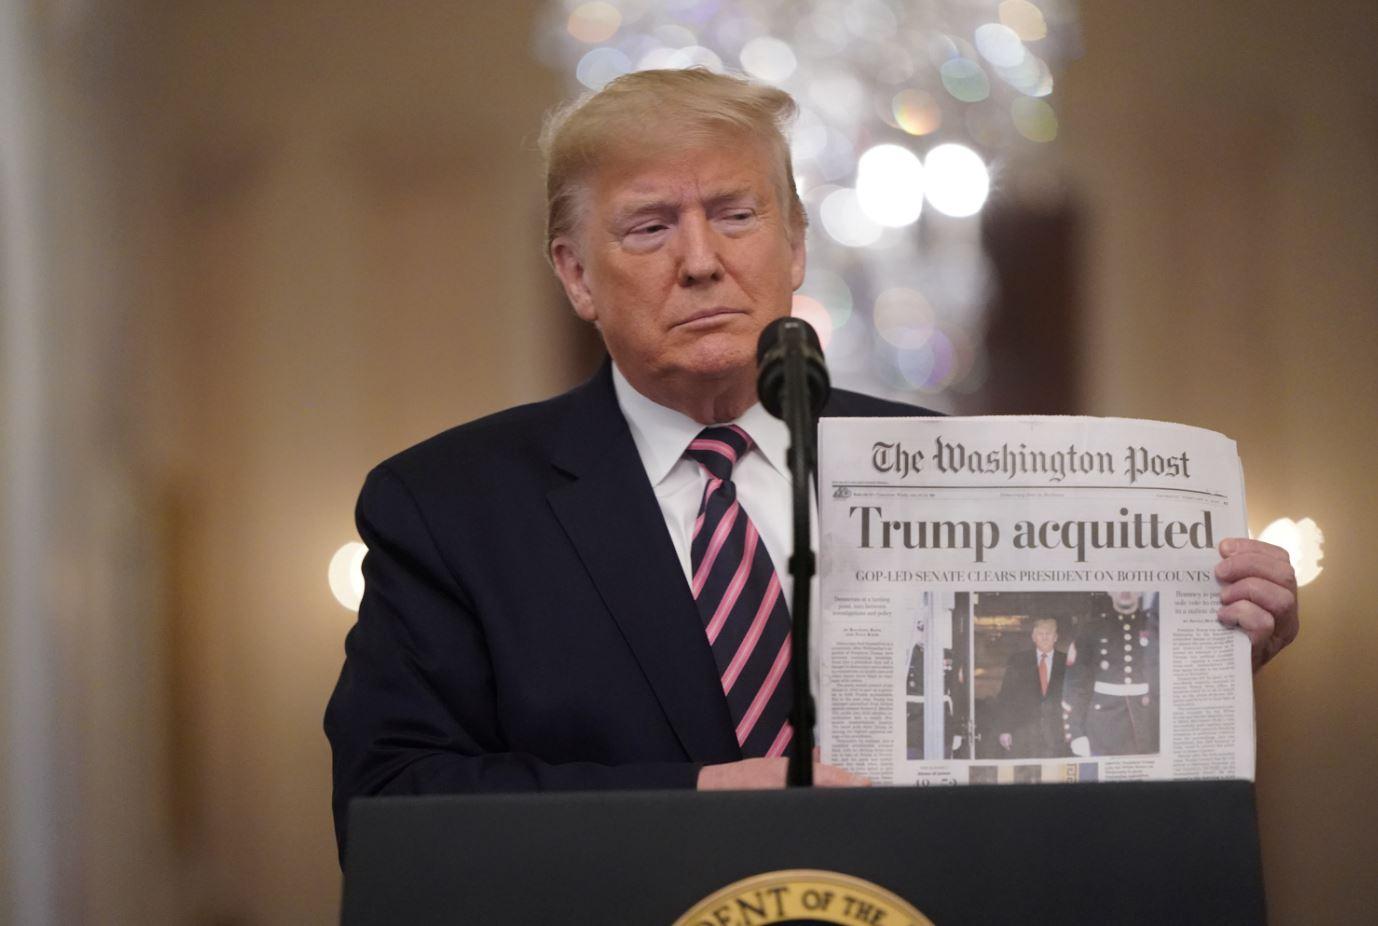 US President Donald Trump holds up a copy of the Washington Post's front page showing news of Trump's acquittal in his Senate impeachment trial, as he arrives to deliver a statement about his acquittal in the East Room of the White House in Washington, US, February 6, 2020. REUTERS/Joshua Roberts 